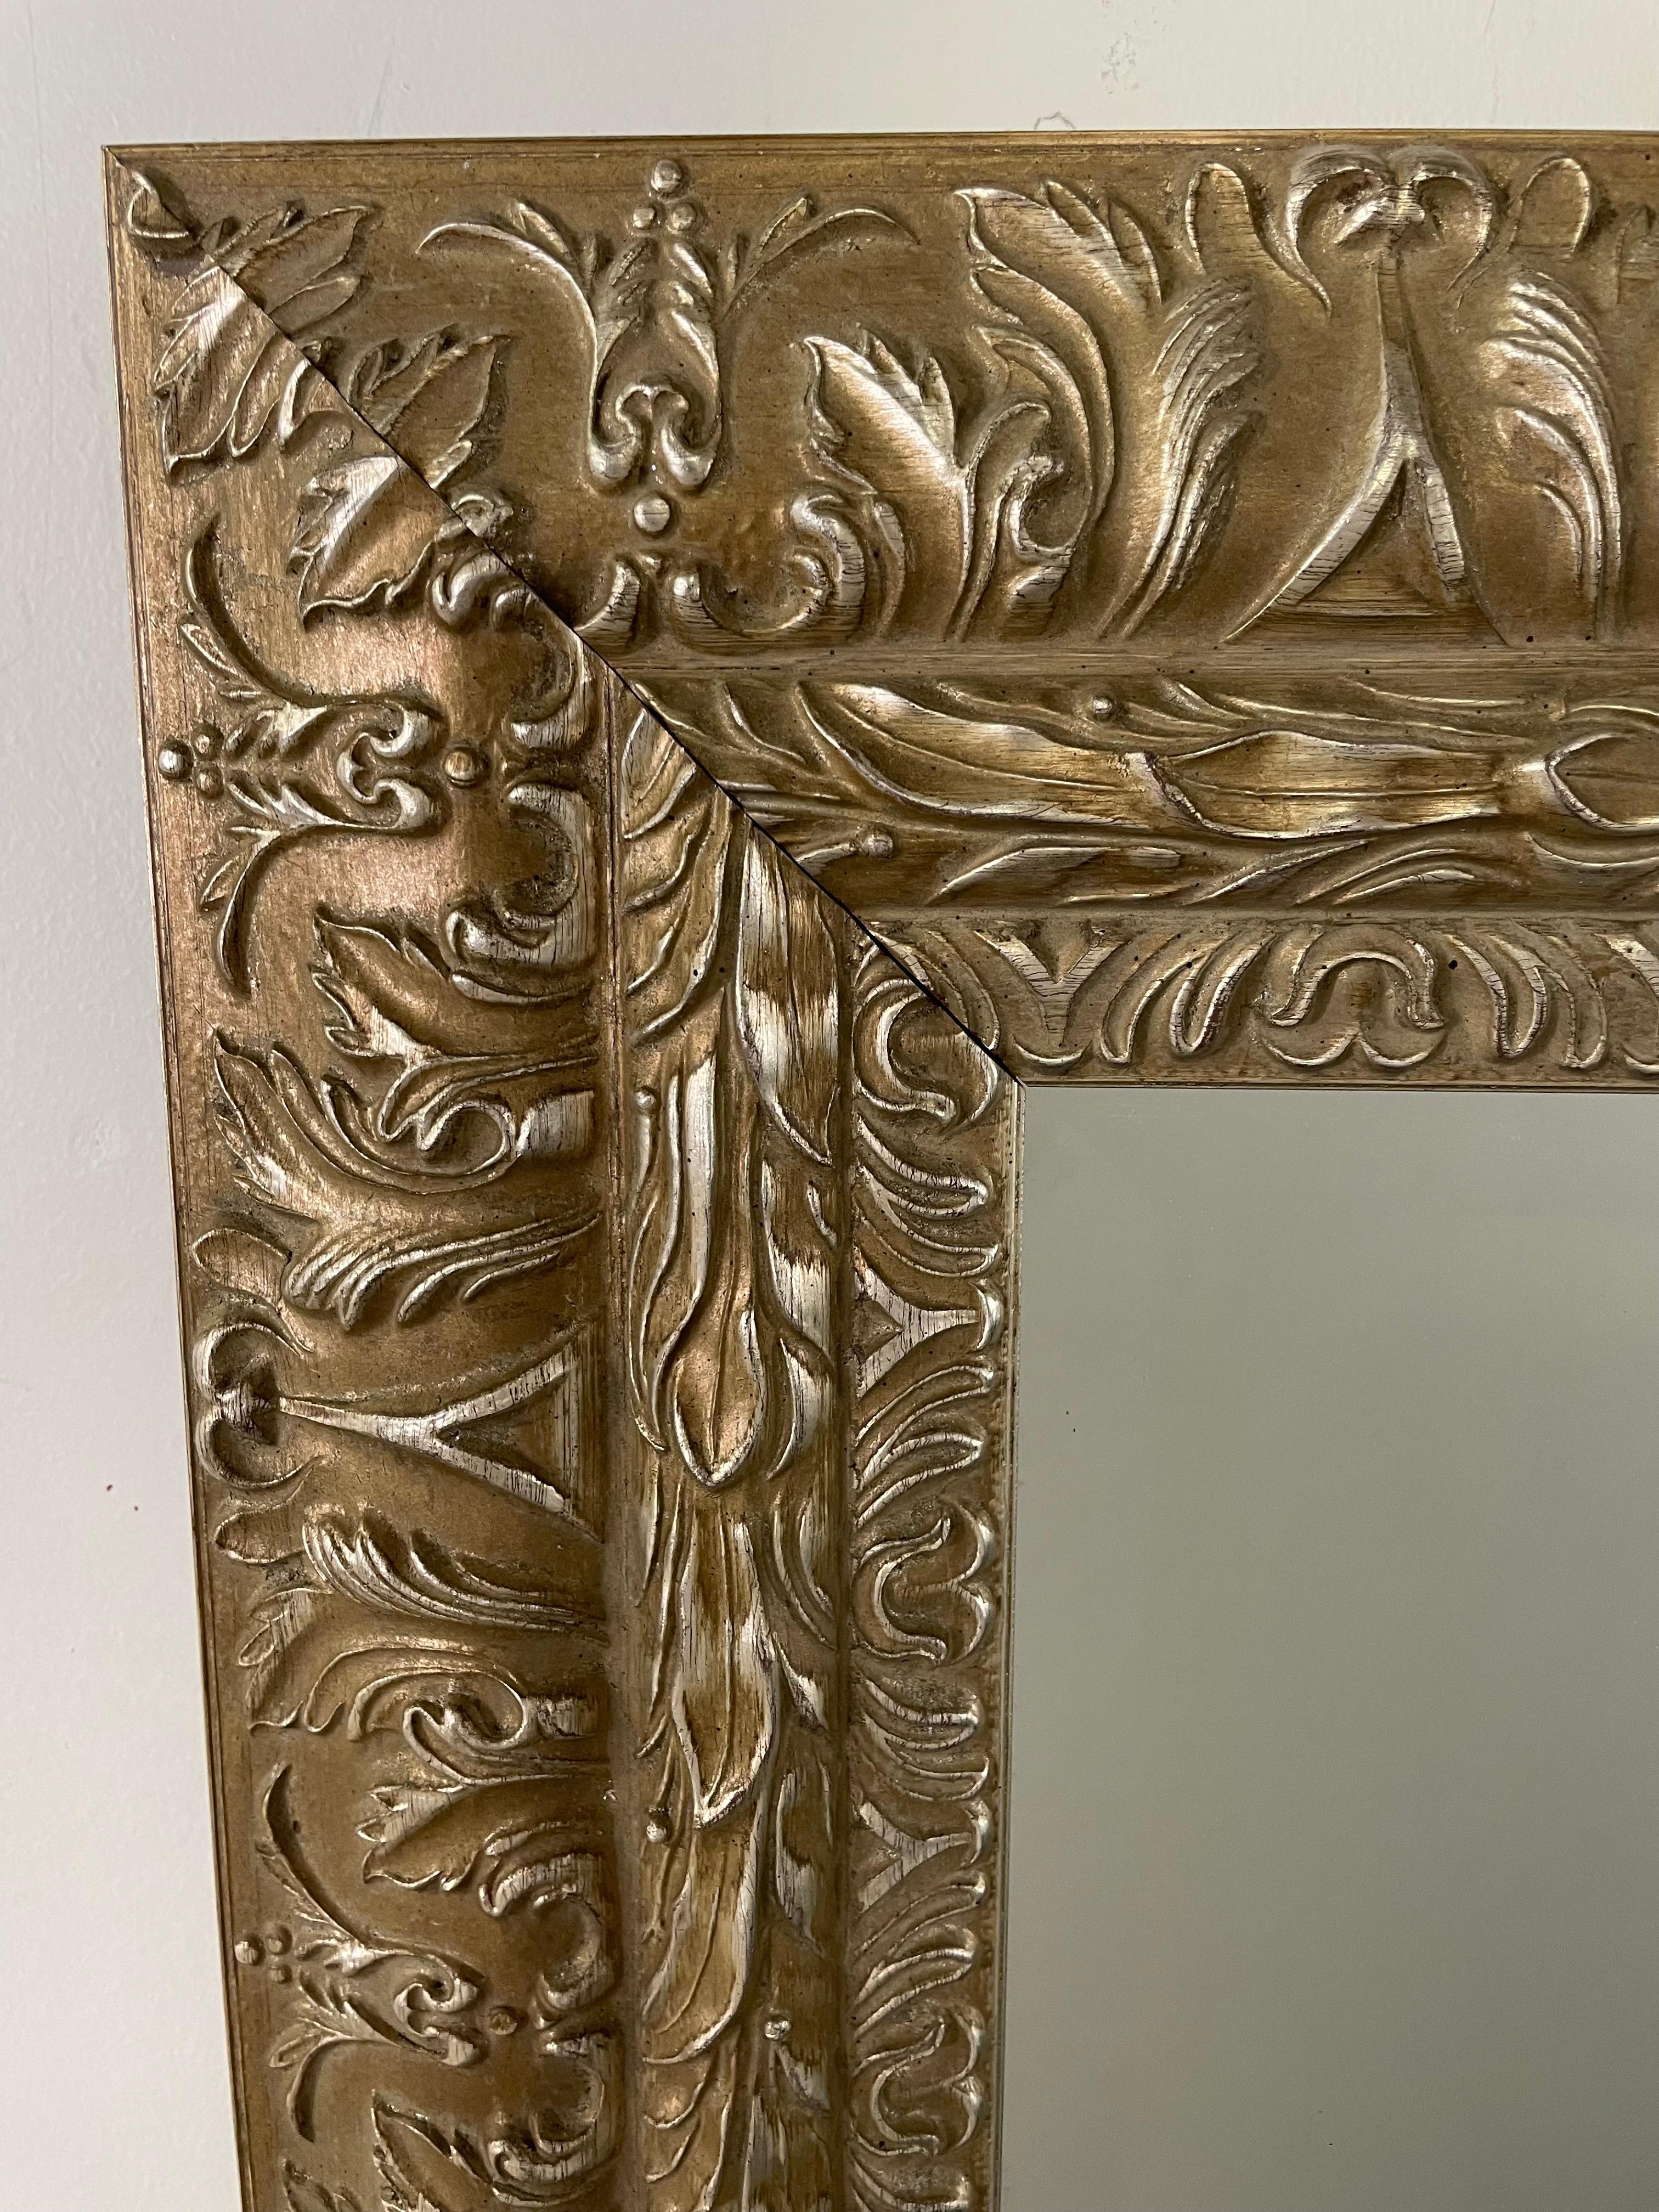 French Regency Style Mirror in Silver/Champagne Tone with Beveled Glass In Good Condition For Sale In Plainview, NY